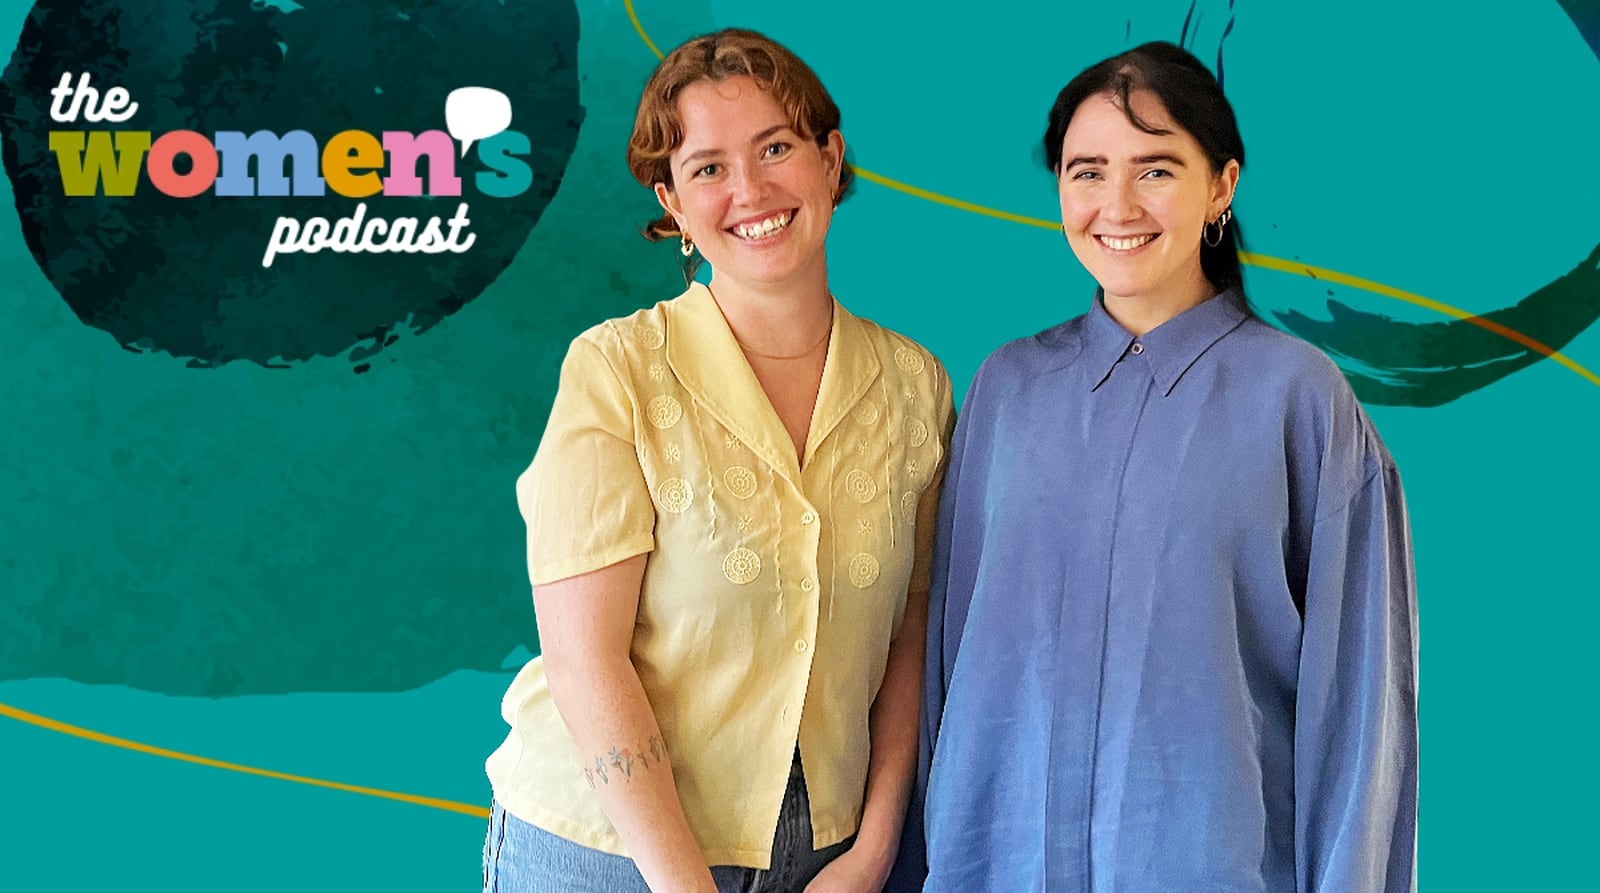 Sadhbh Malin and Sinéad Gallagher tell The Women’s Podcast about their Dublin Fringe Festival collaboration ‘in heat’